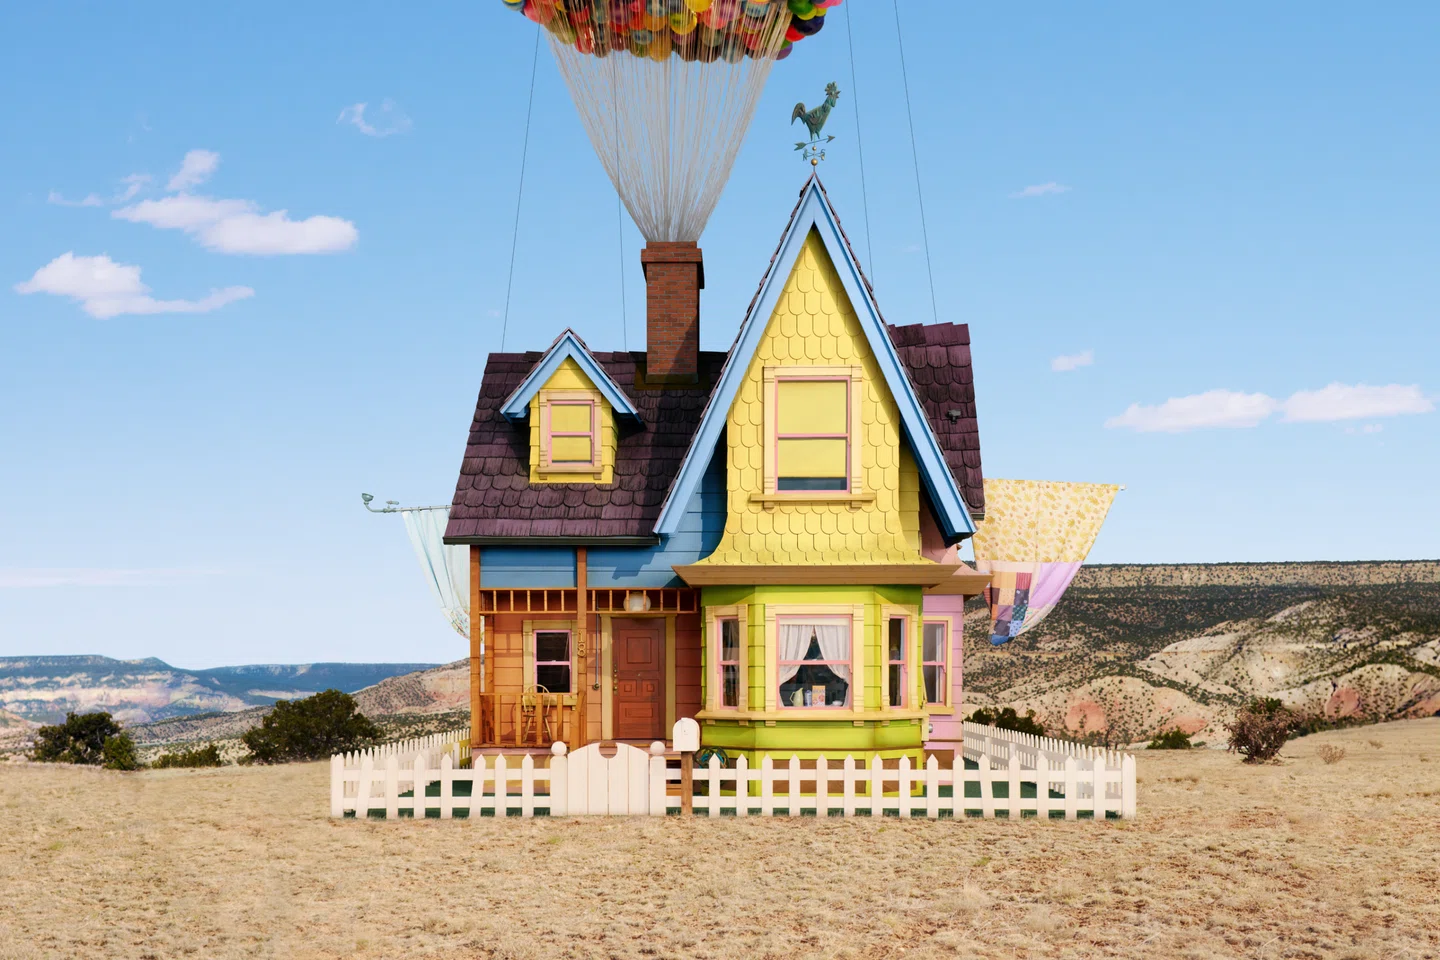 Colorful house lifted by balloons over desert landscape